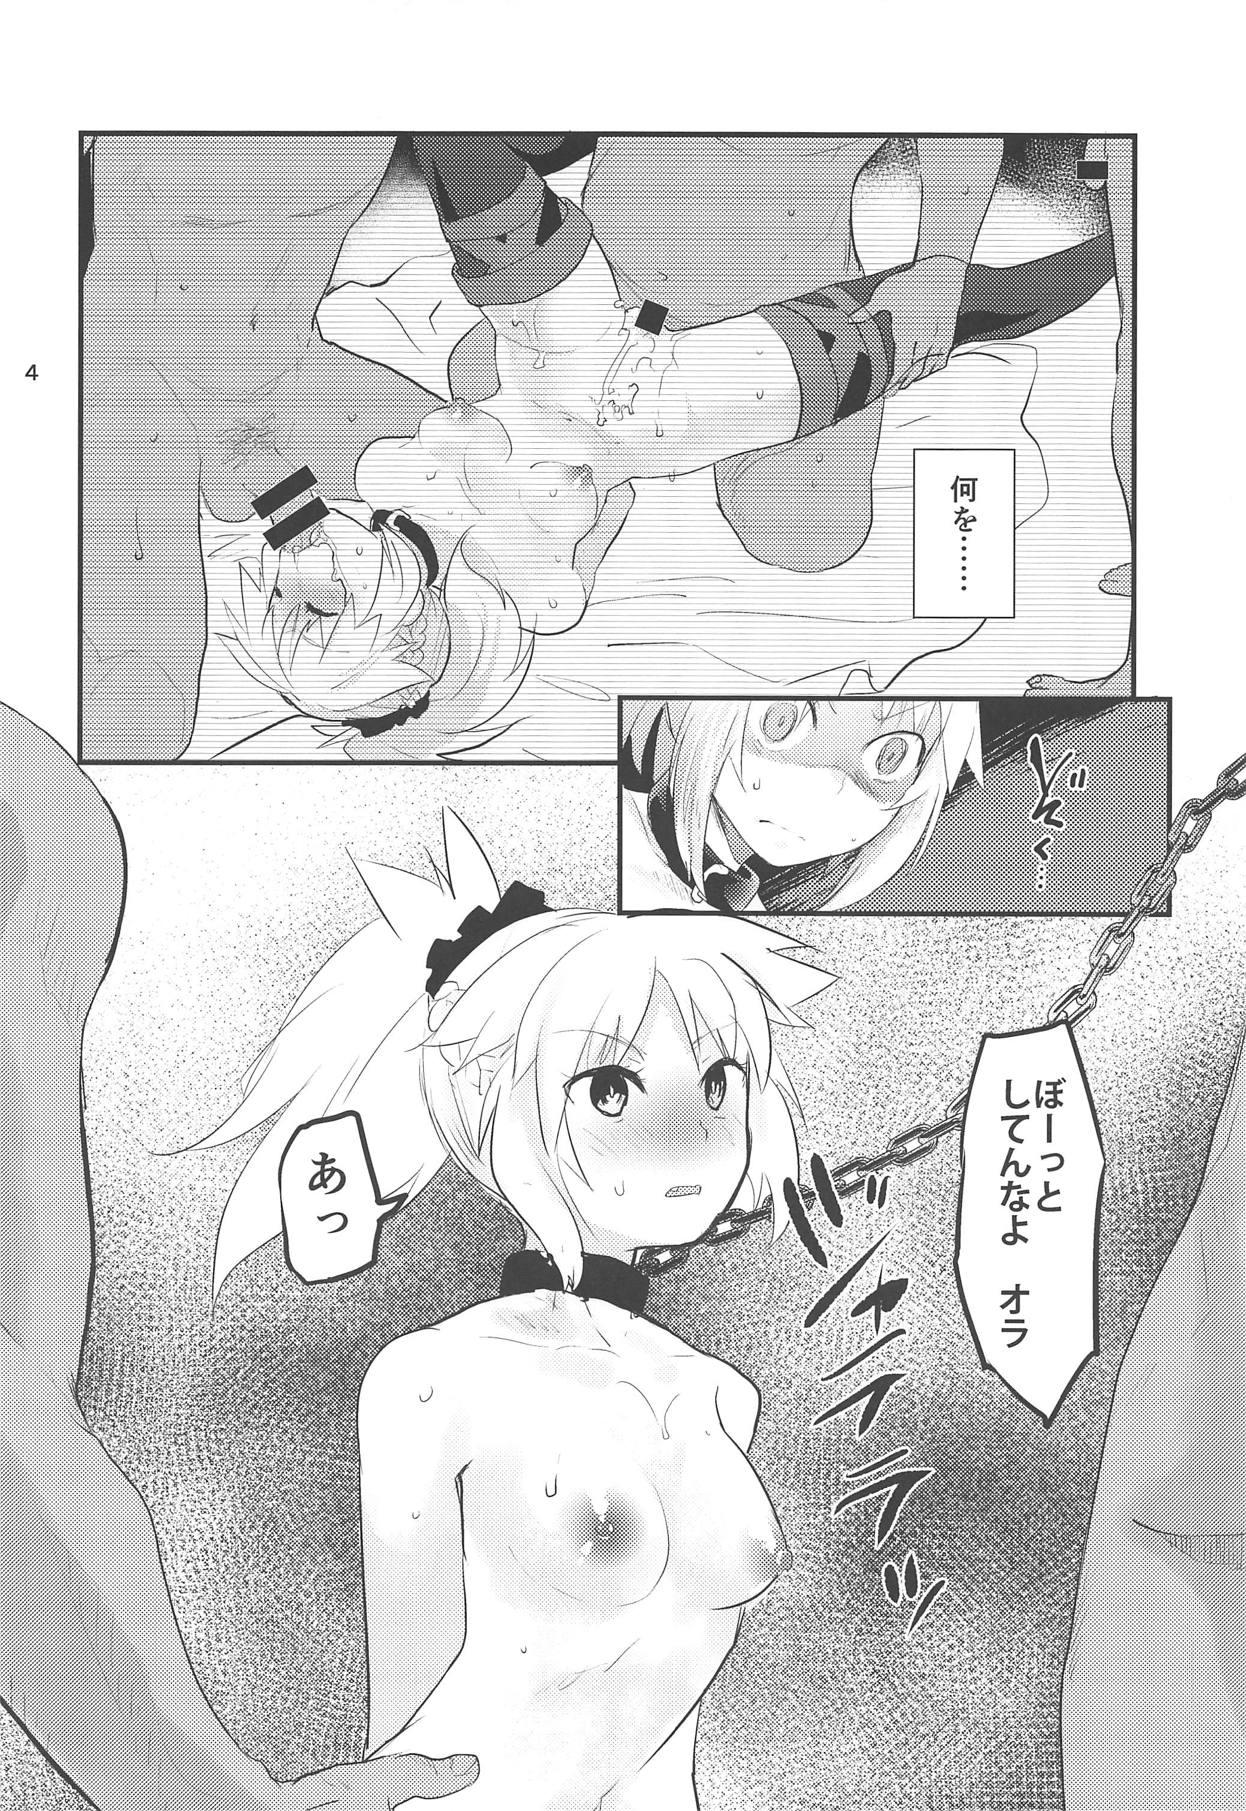 Boobs Erotic to Knight - Fate grand order Girl Gets Fucked - Page 3